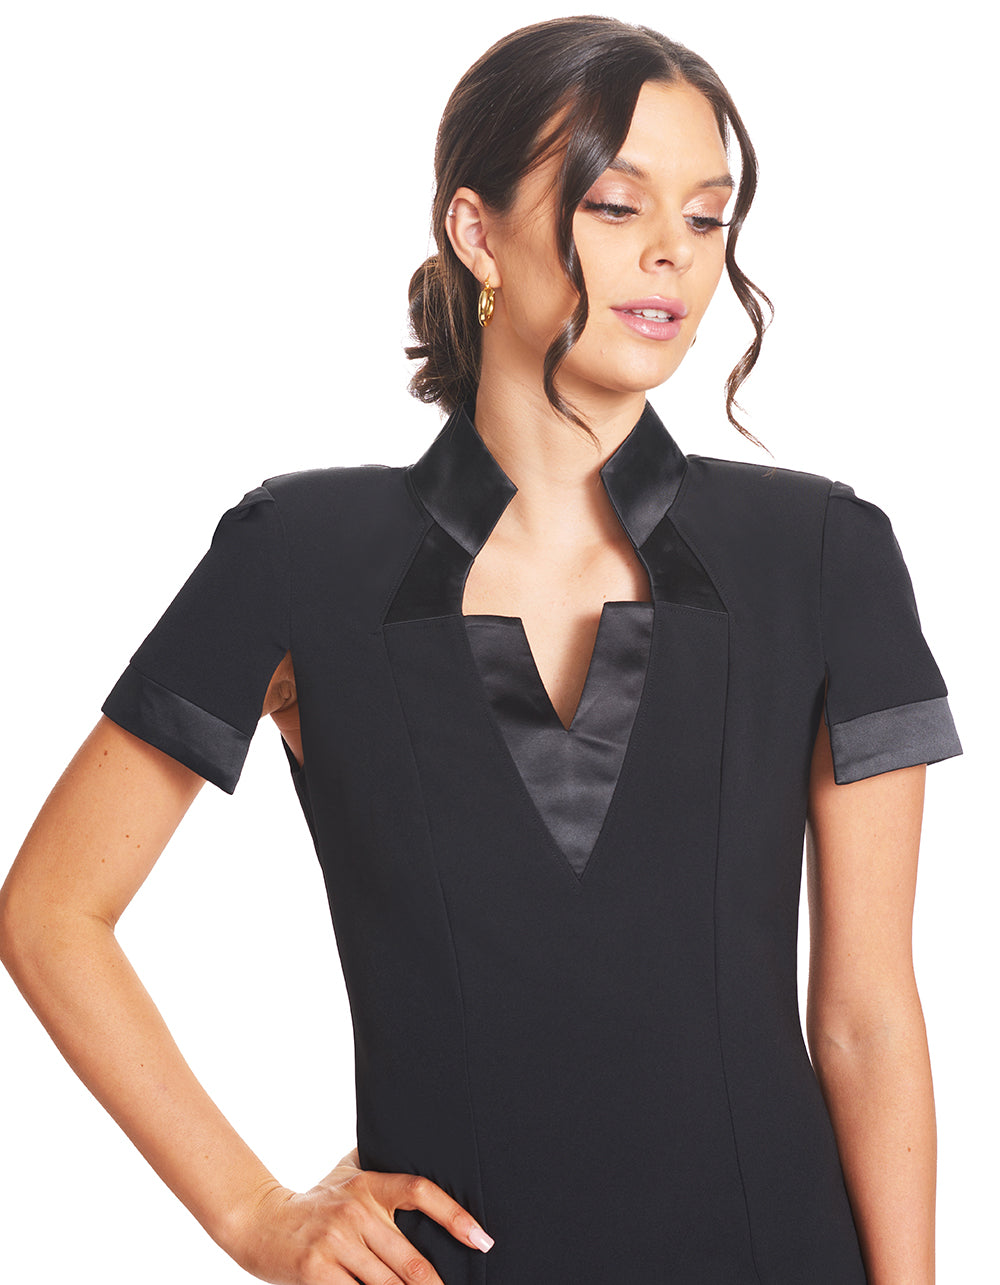 Close-up front view of model wearing the Simona Maghen Top Notch Dress, notch neck high collar poly/spandex crepe sheath dress with split cap sleeves and satin contrast bands.